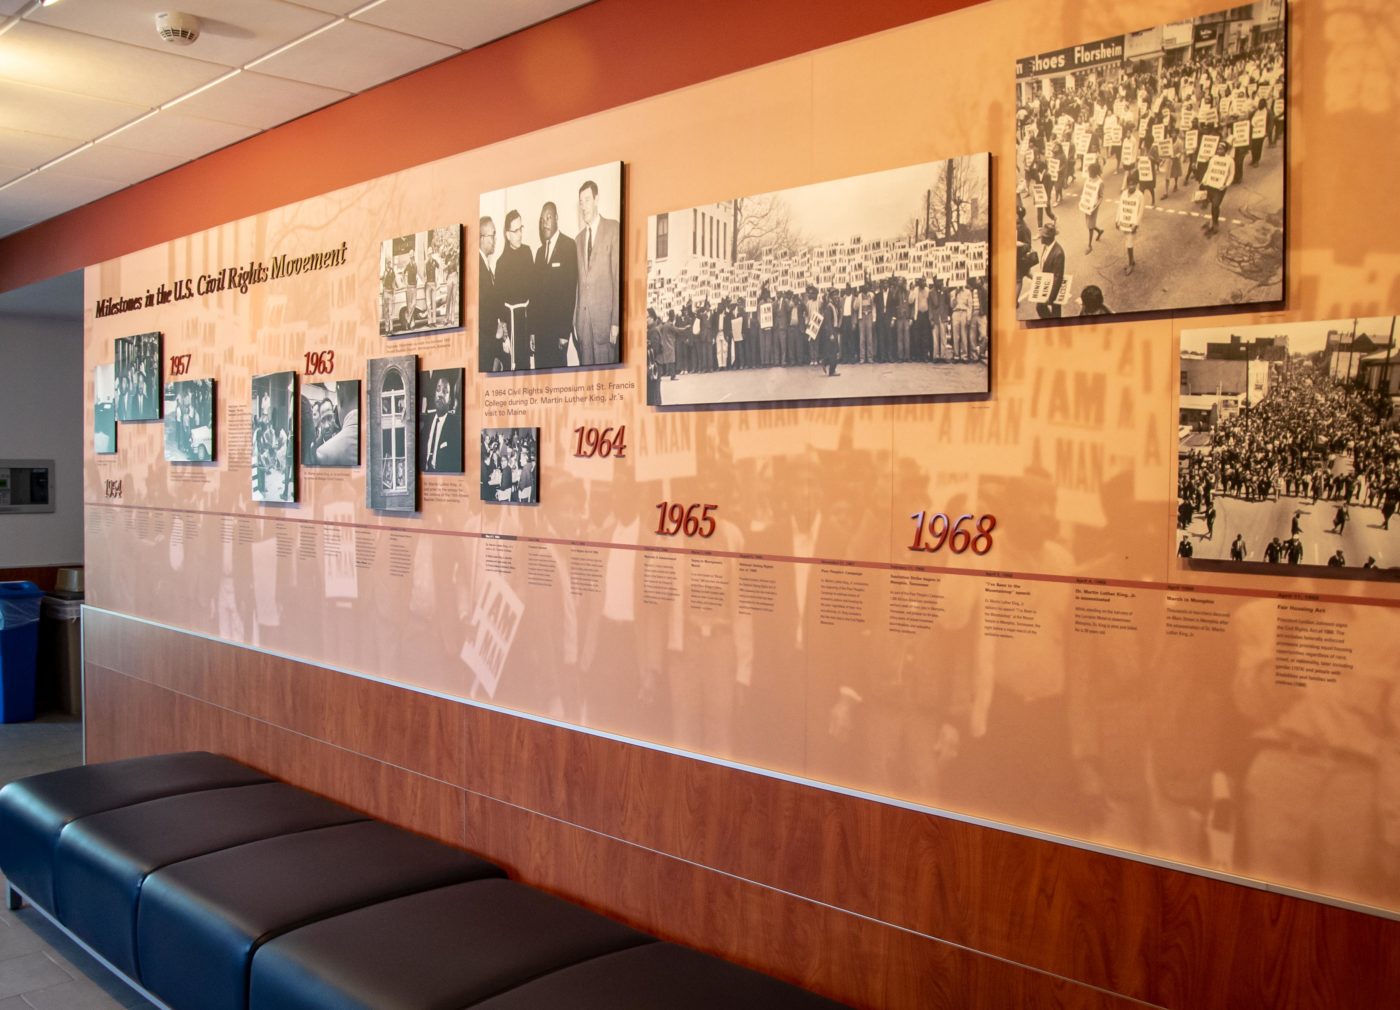 Milestones in the U.S. Civil Rights Movement exhibit wall with historical photographs and timeline